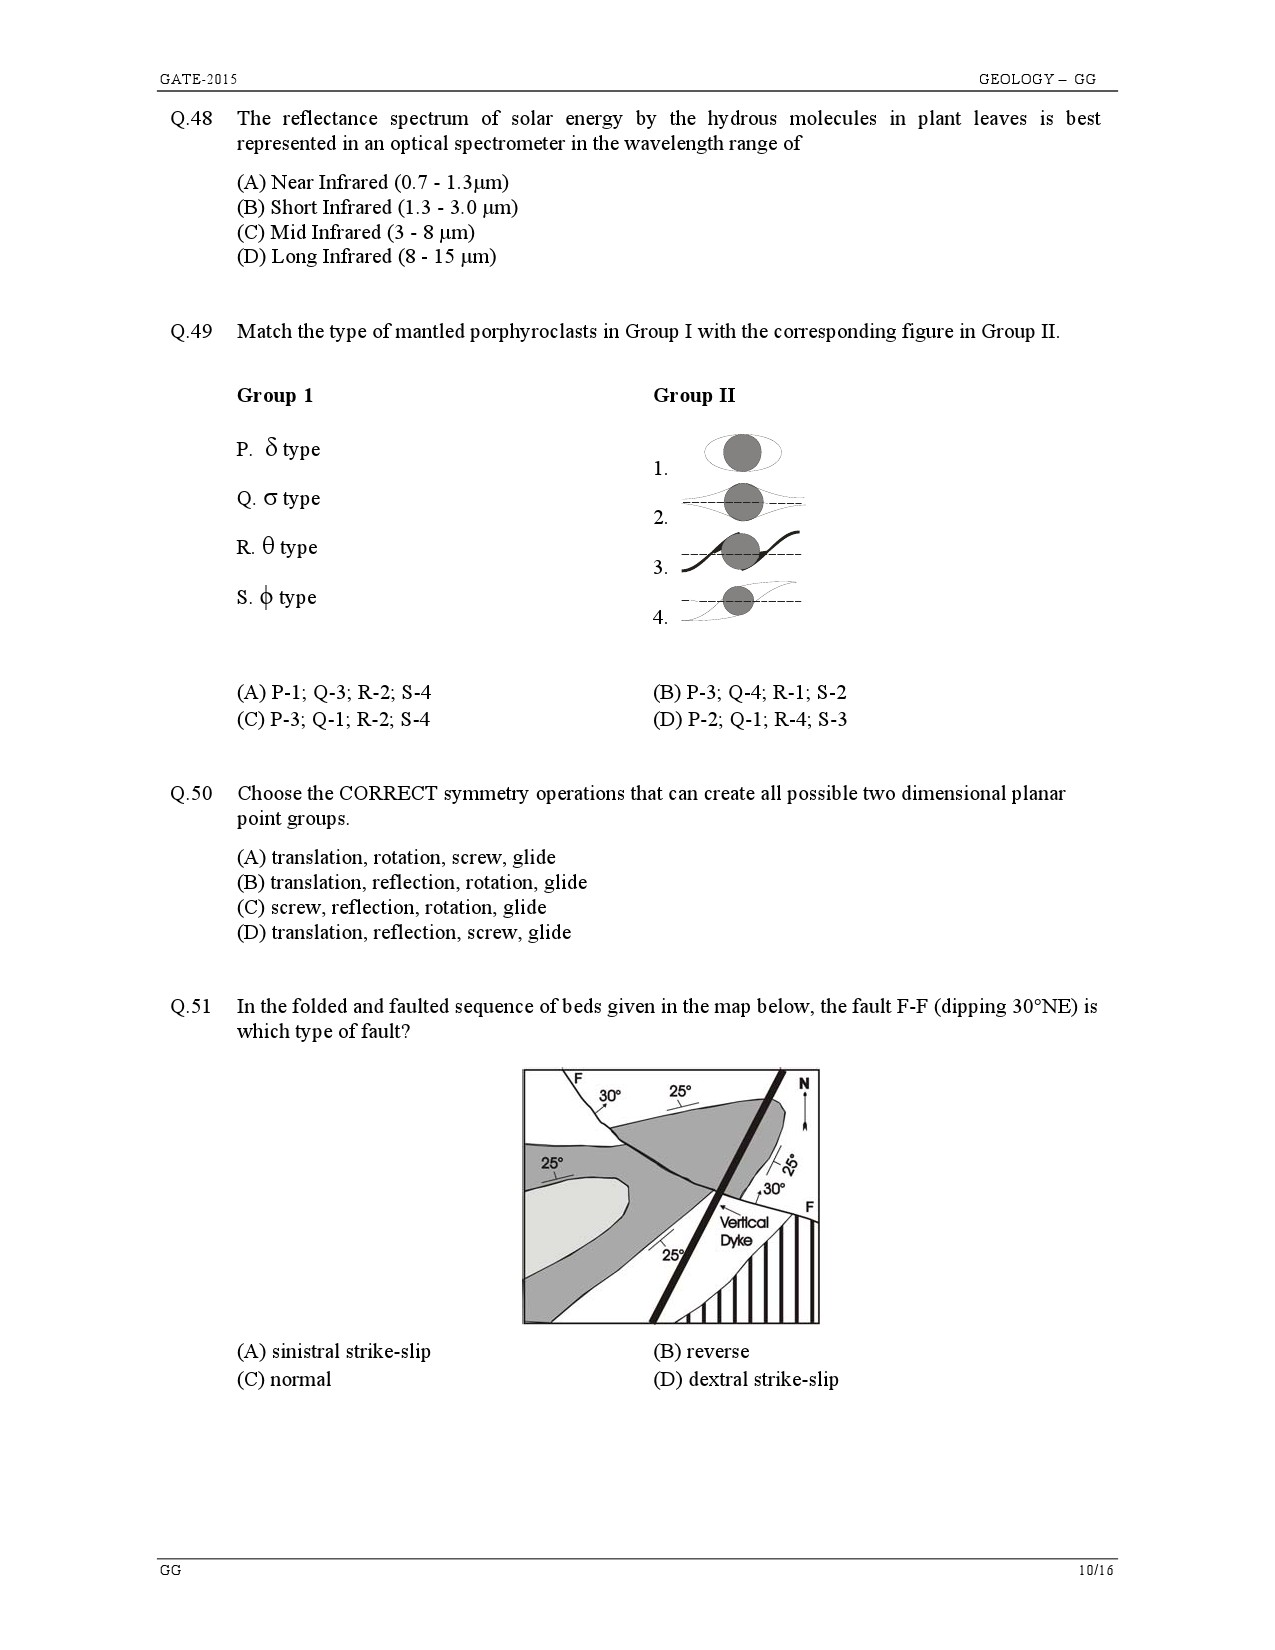 GATE Exam Question Paper 2015 Geology and Geophysics 10